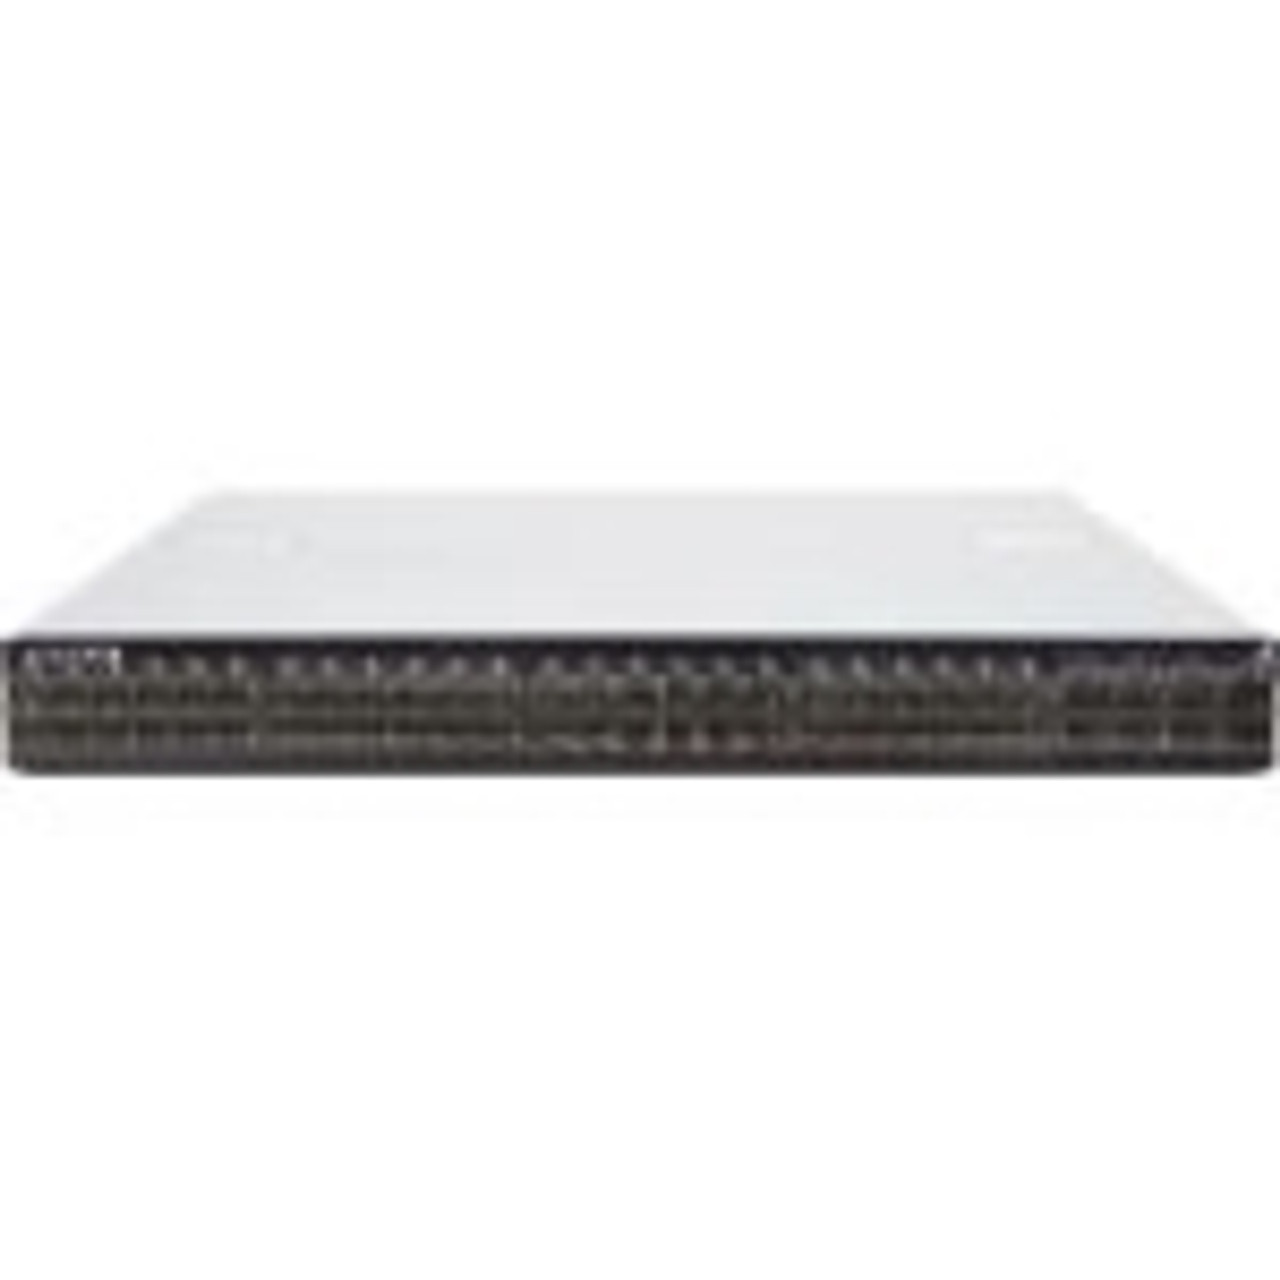 MSN2410-BB2R Mellanox Spectrum SN2410 Ethernet Switch 48 Expansion Slot, 8 Expansion Slot Manageable Optical Fiber Modular 3 Layer Supported 1U High